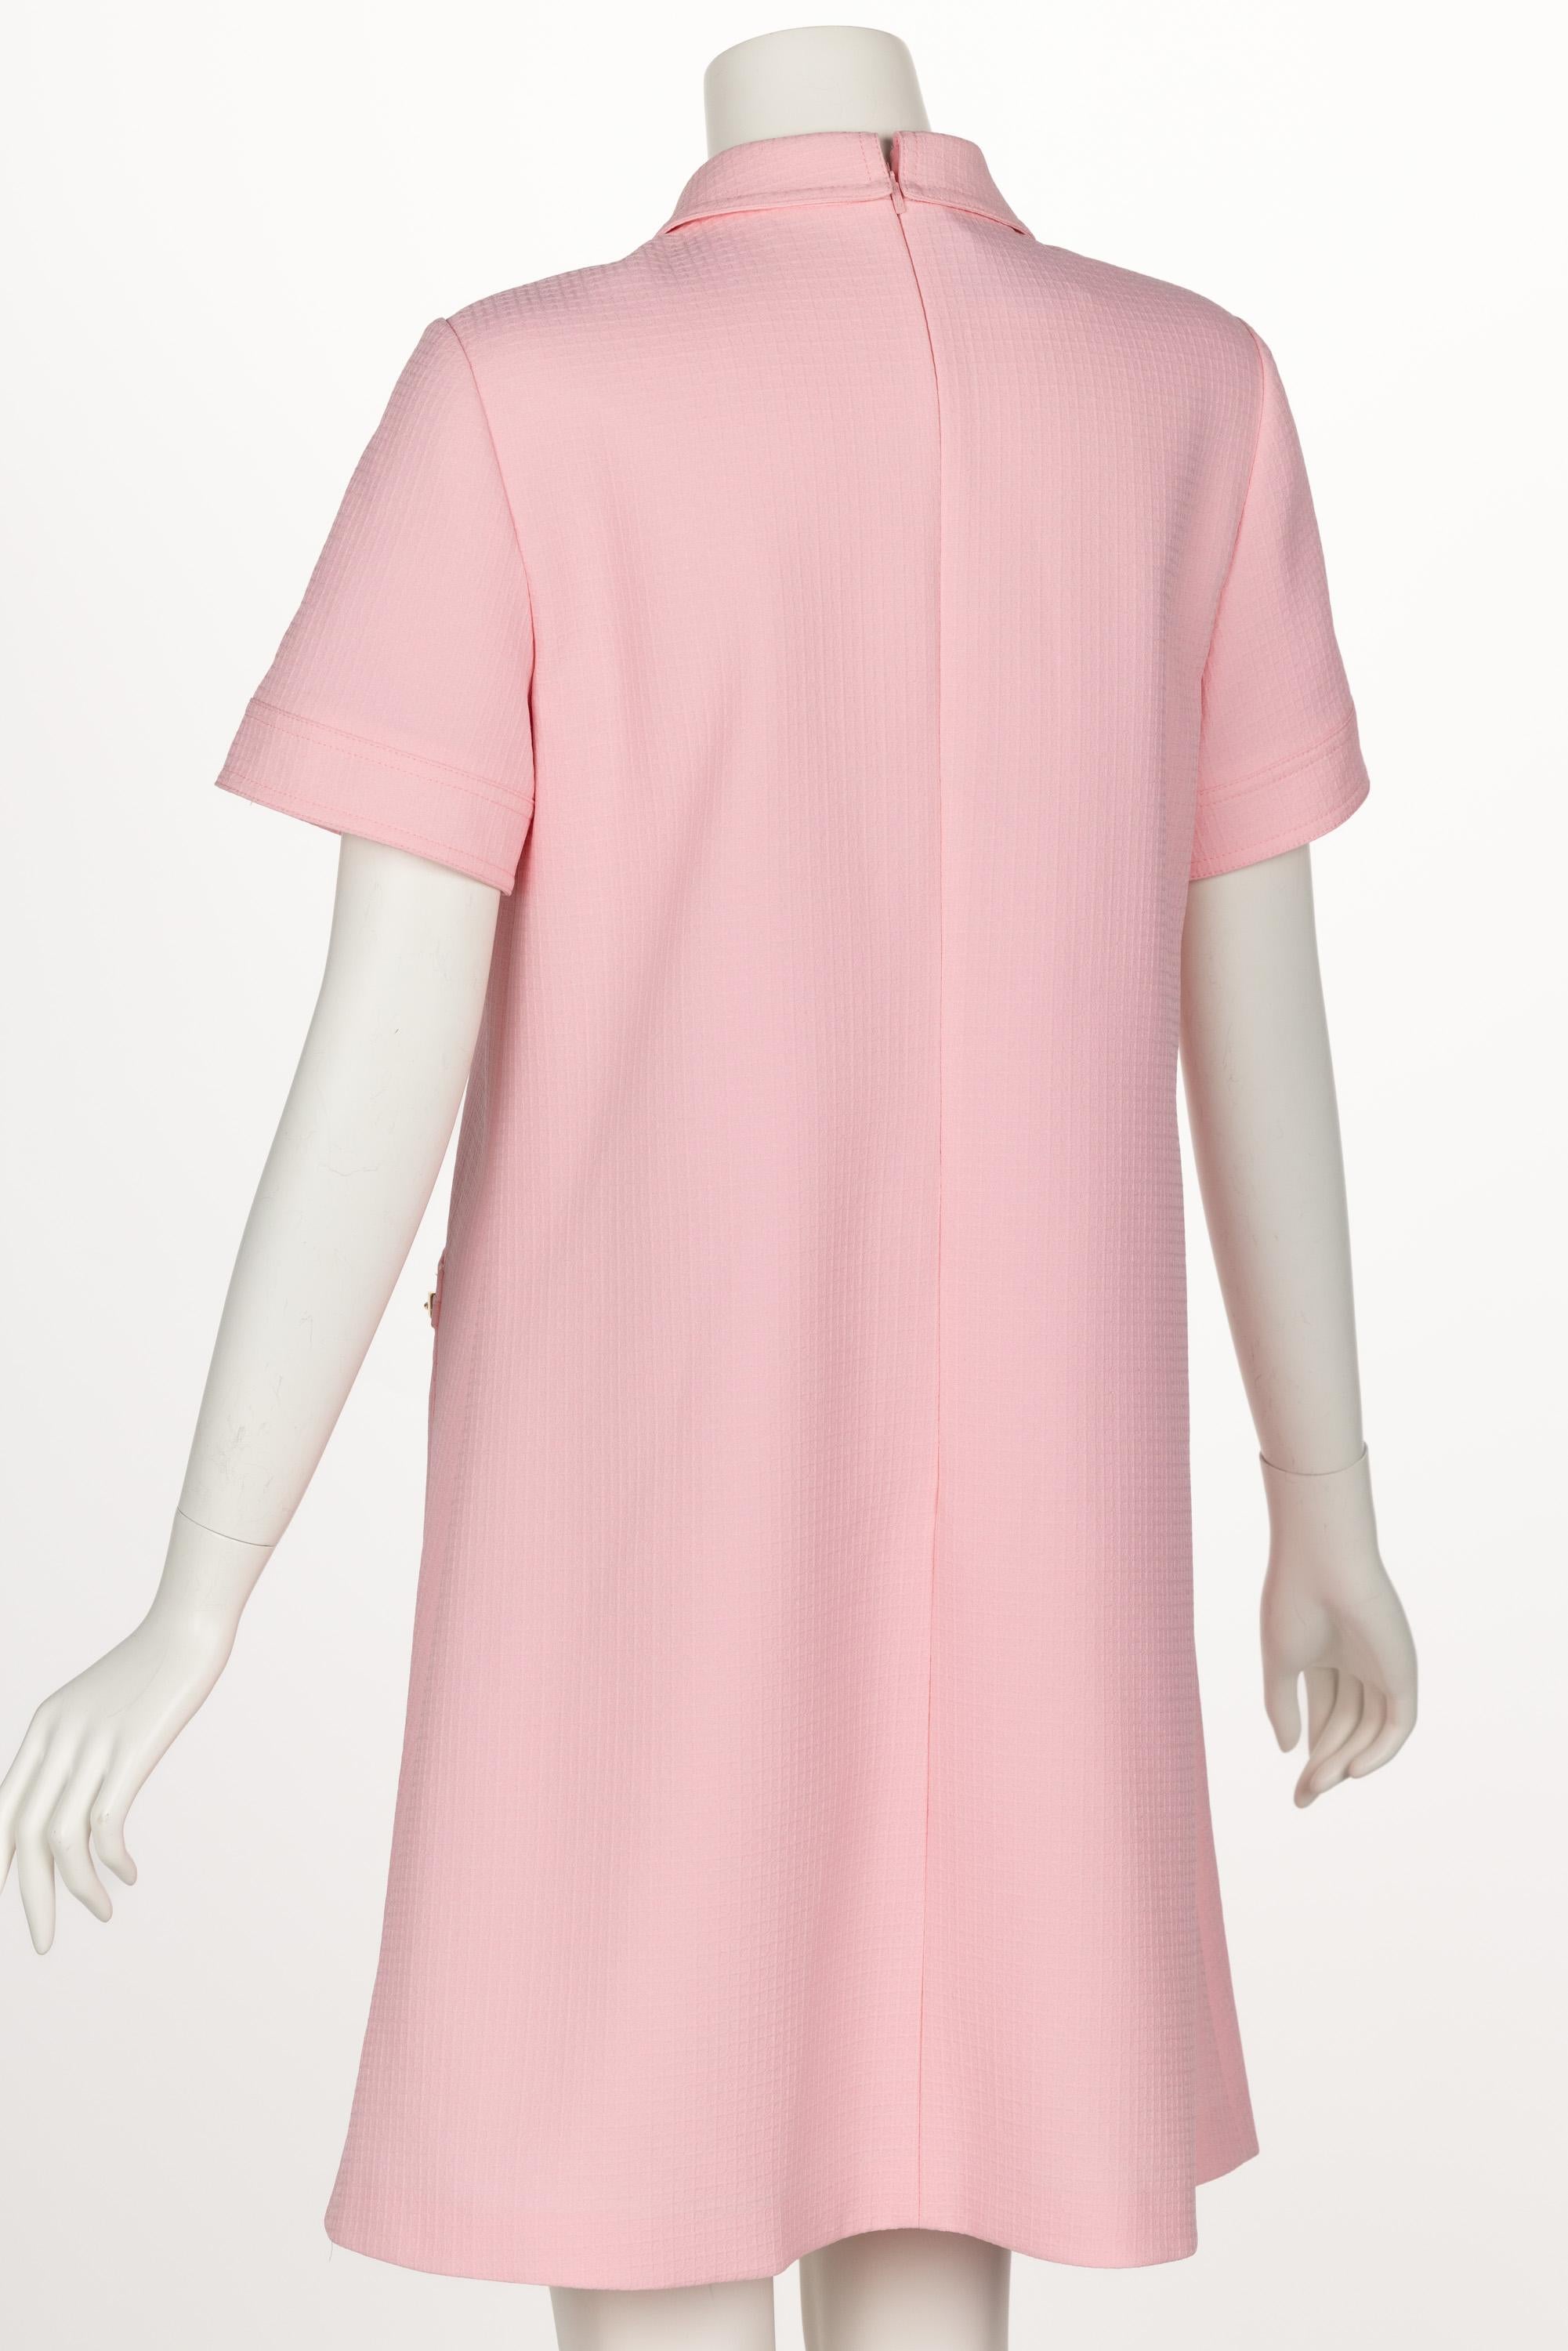 Gucci Pink Textured Chain Trim Mini Polo Dress New w/ Tags In New Condition For Sale In Boca Raton, FL